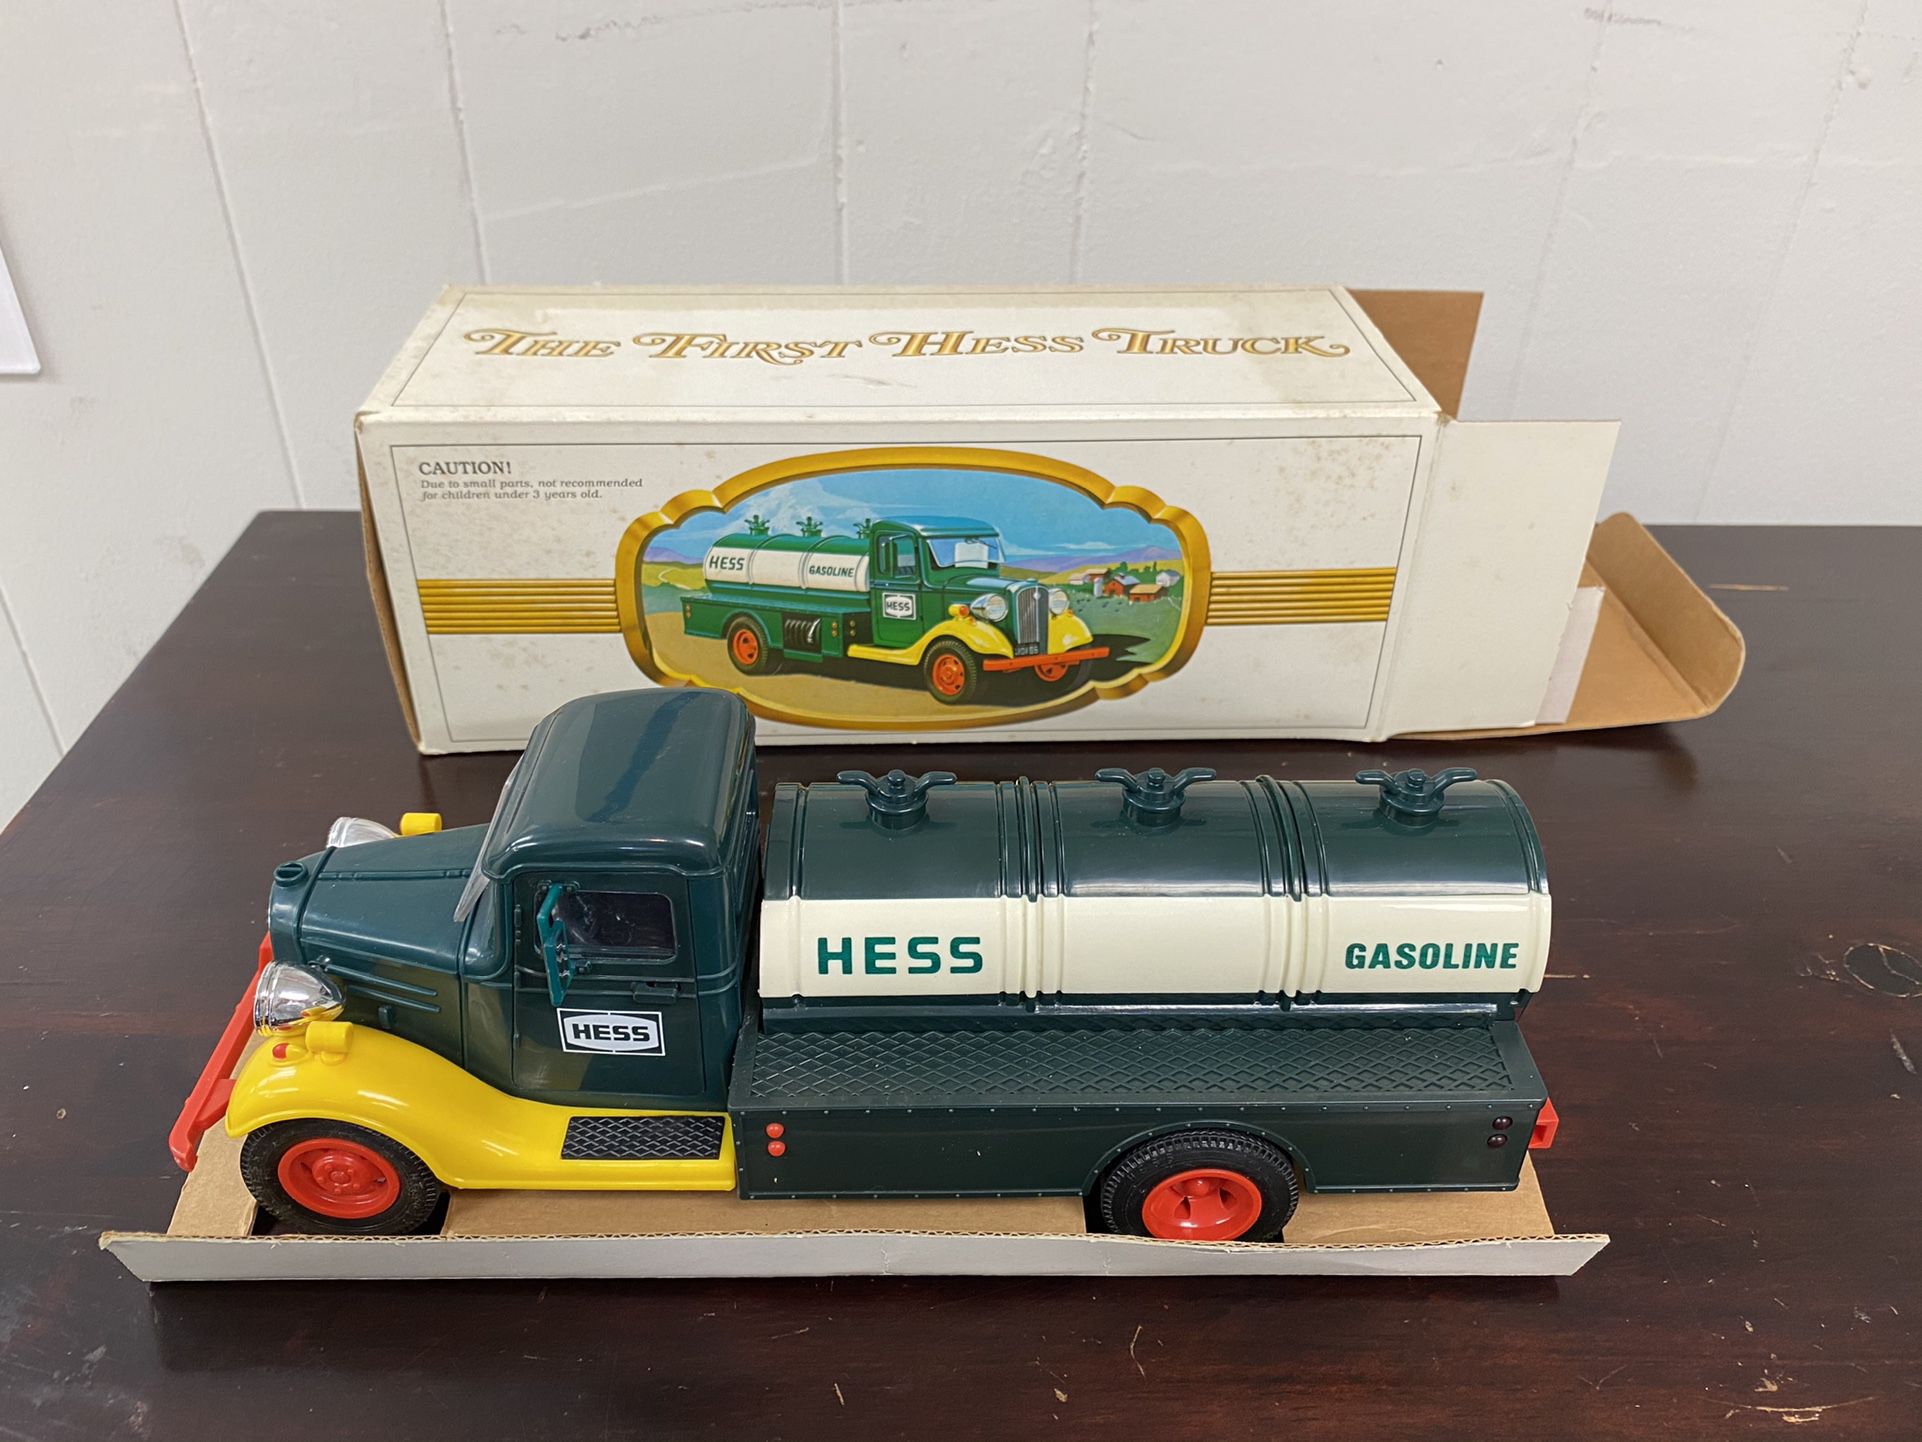 The First Hess Truck 1984